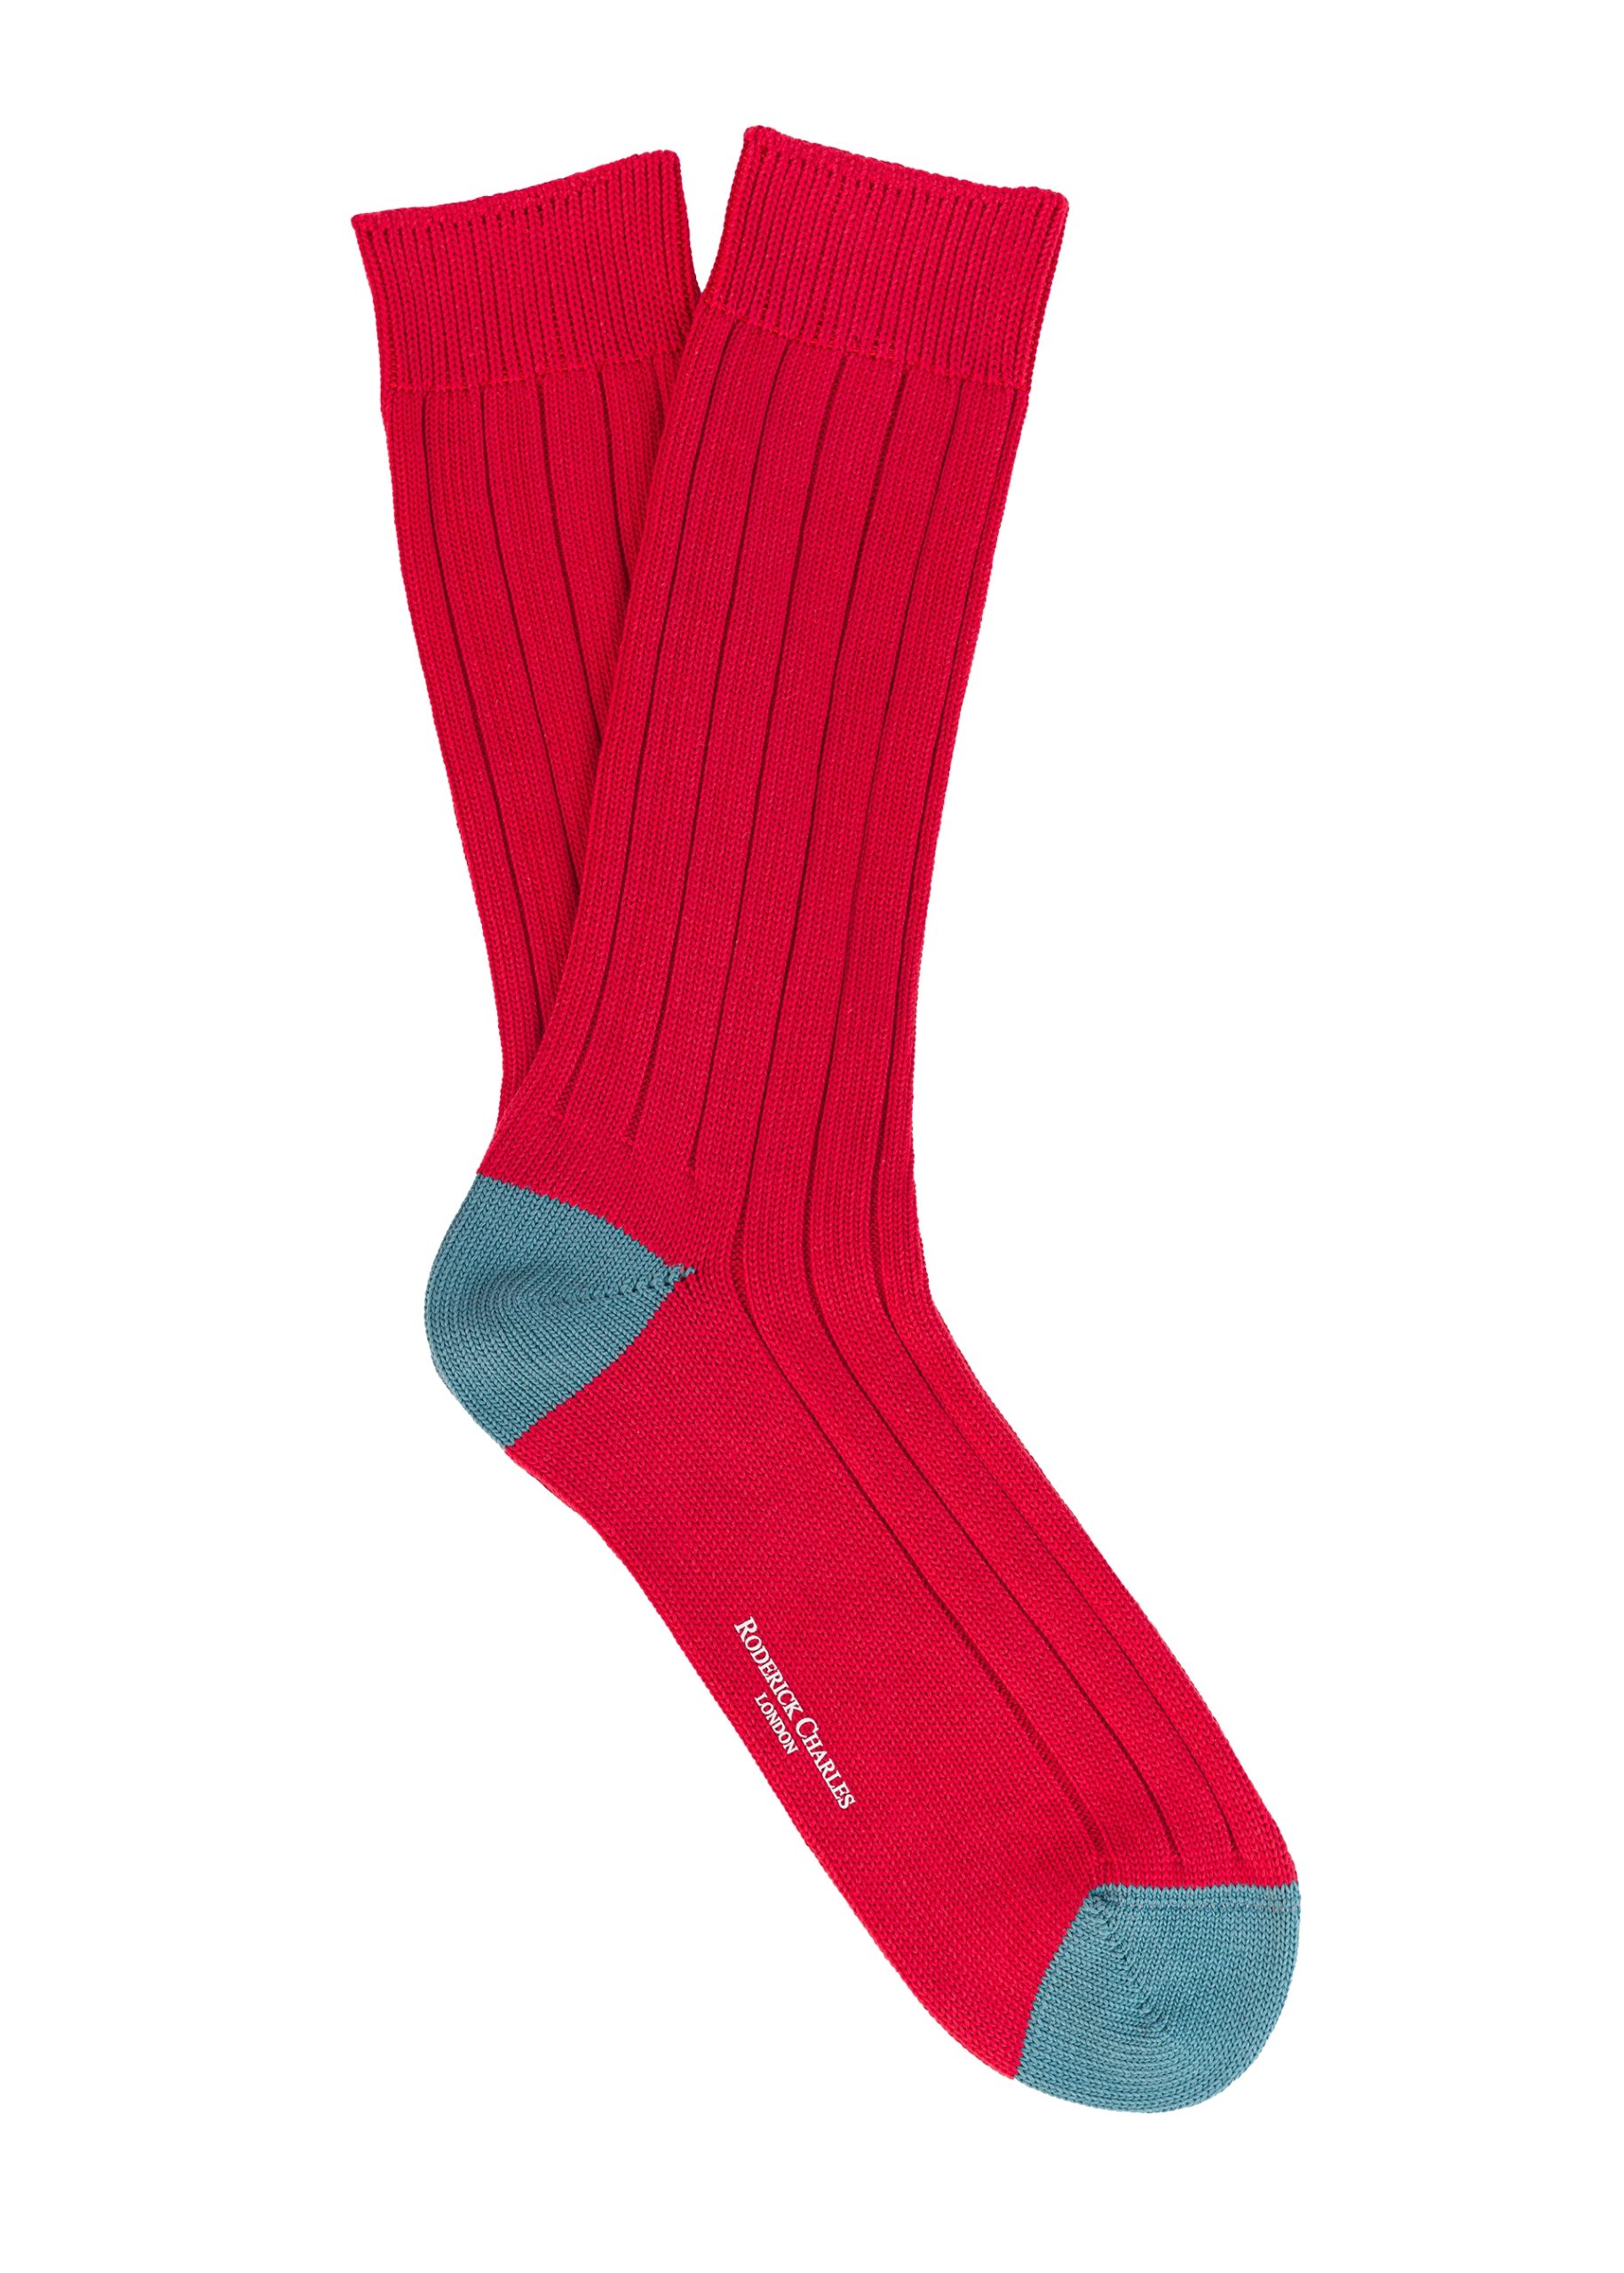 A men’s contrast heel and toe cotton sock in red and blue by Roderick Charles